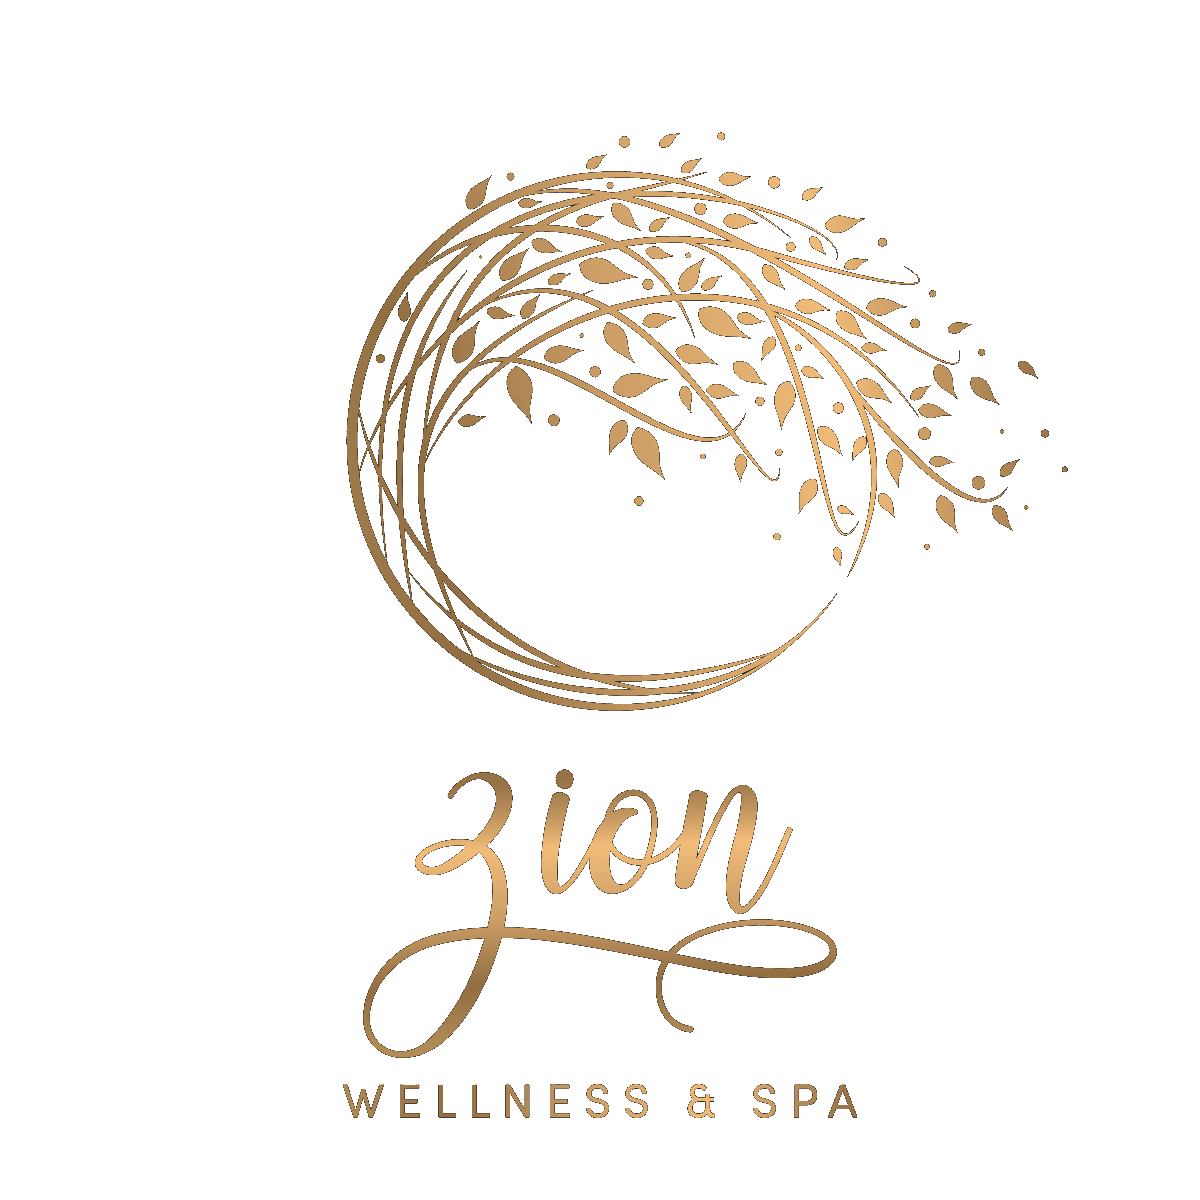 Zion Wellness and Spa - Check out all our services!